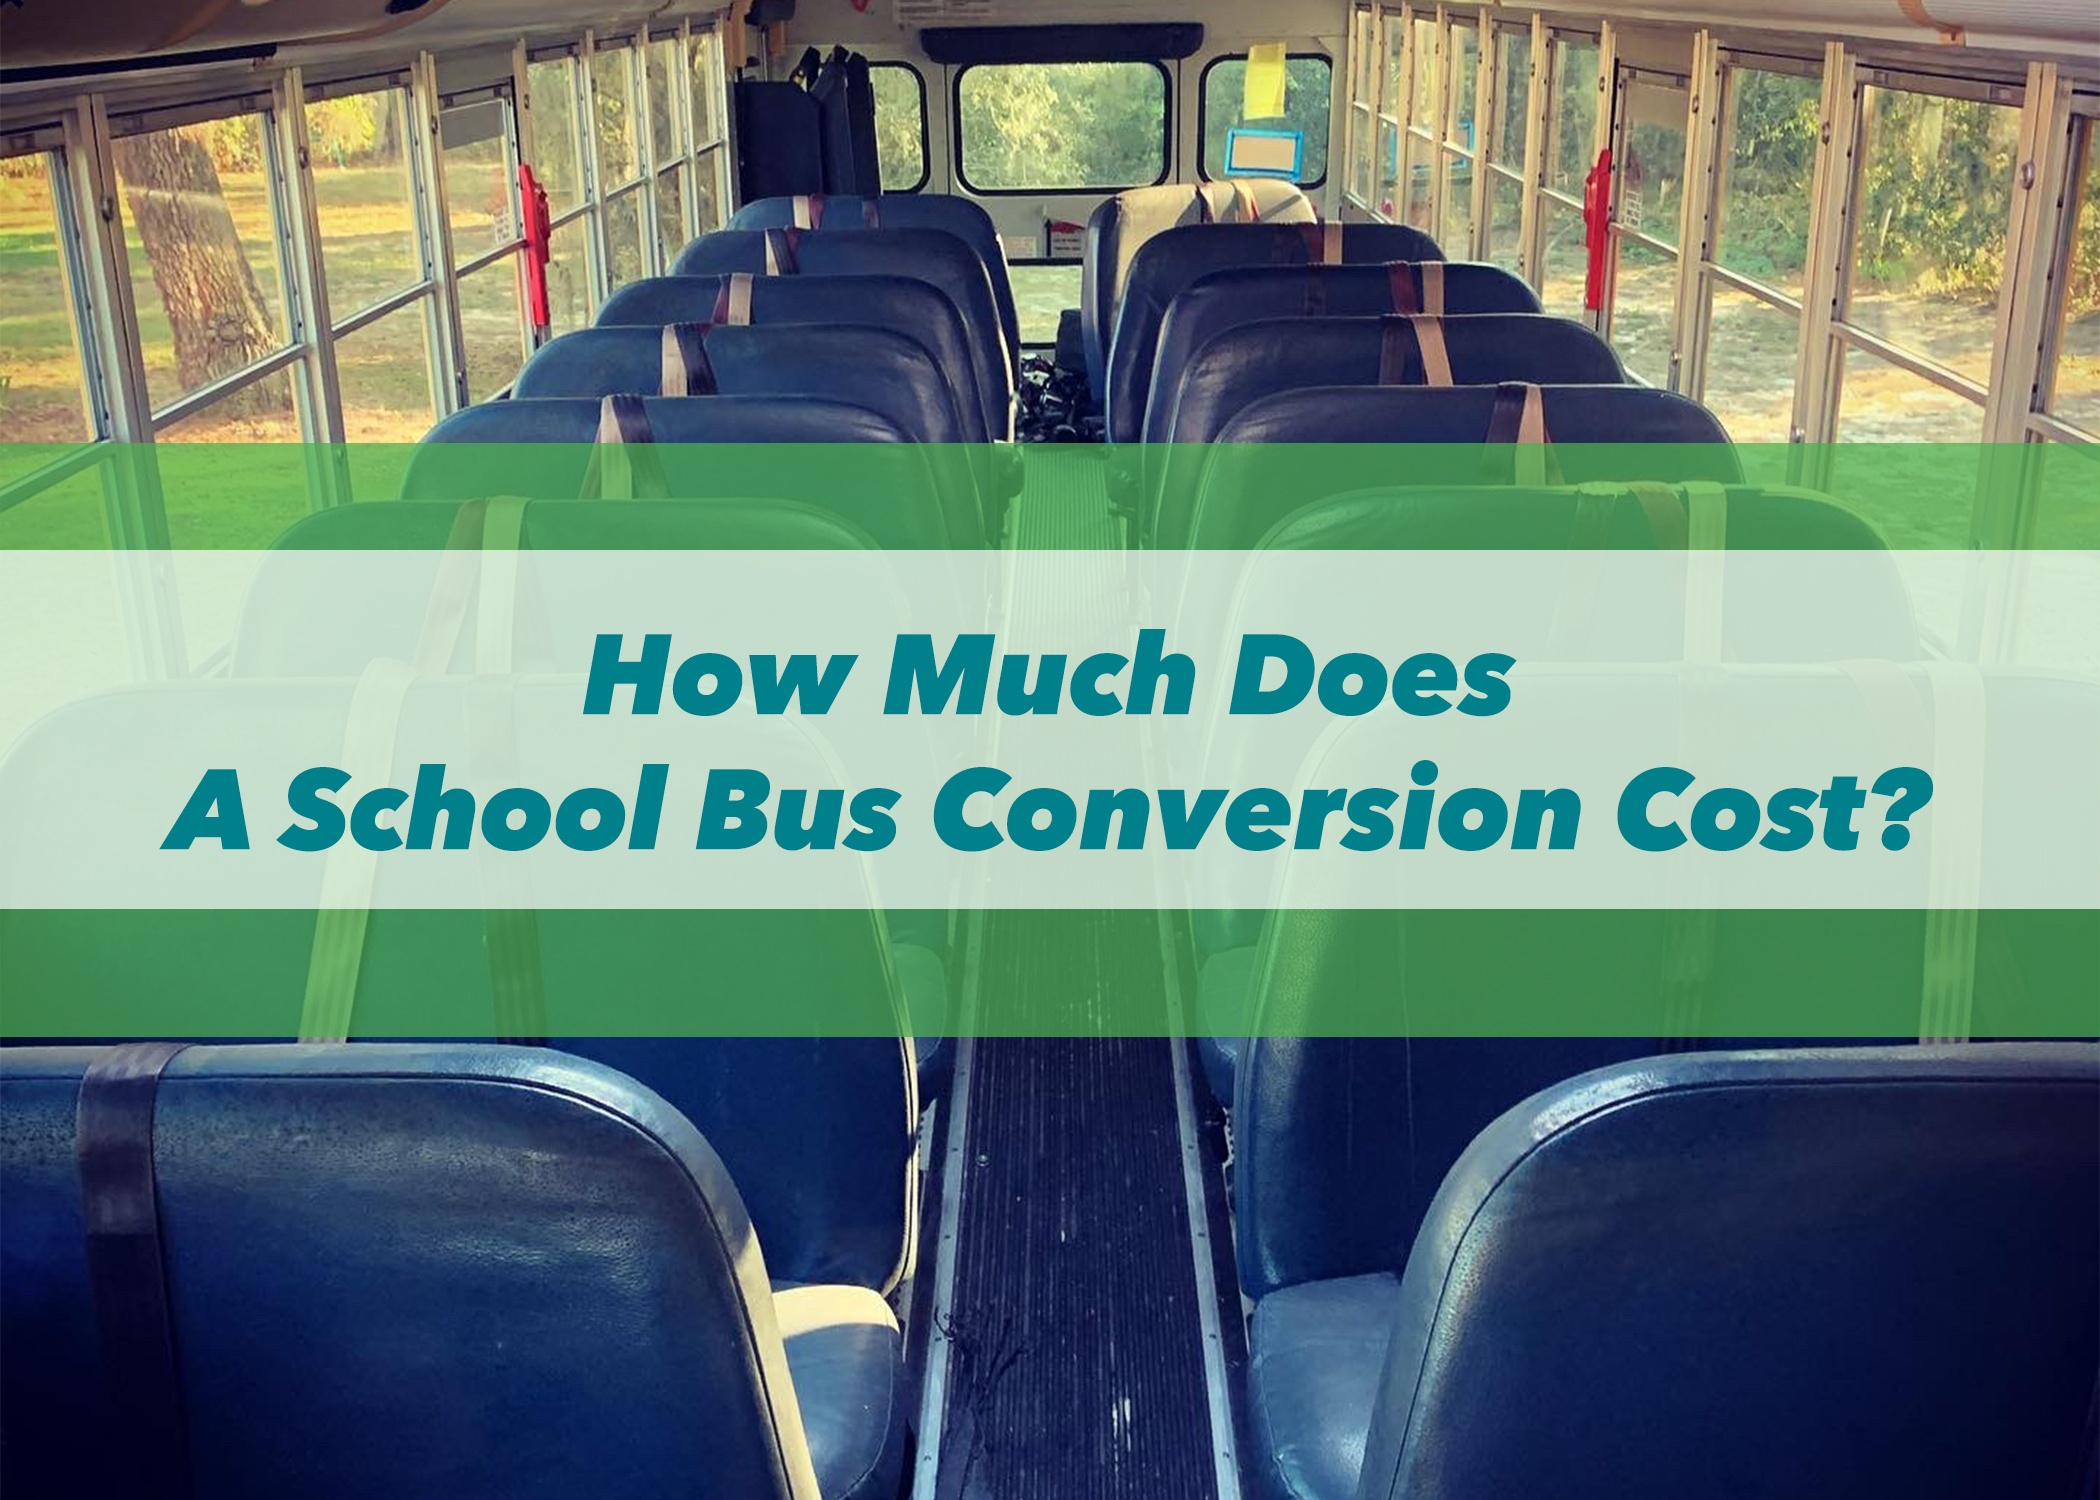 How Much Does A School Bus Conversion Cost?